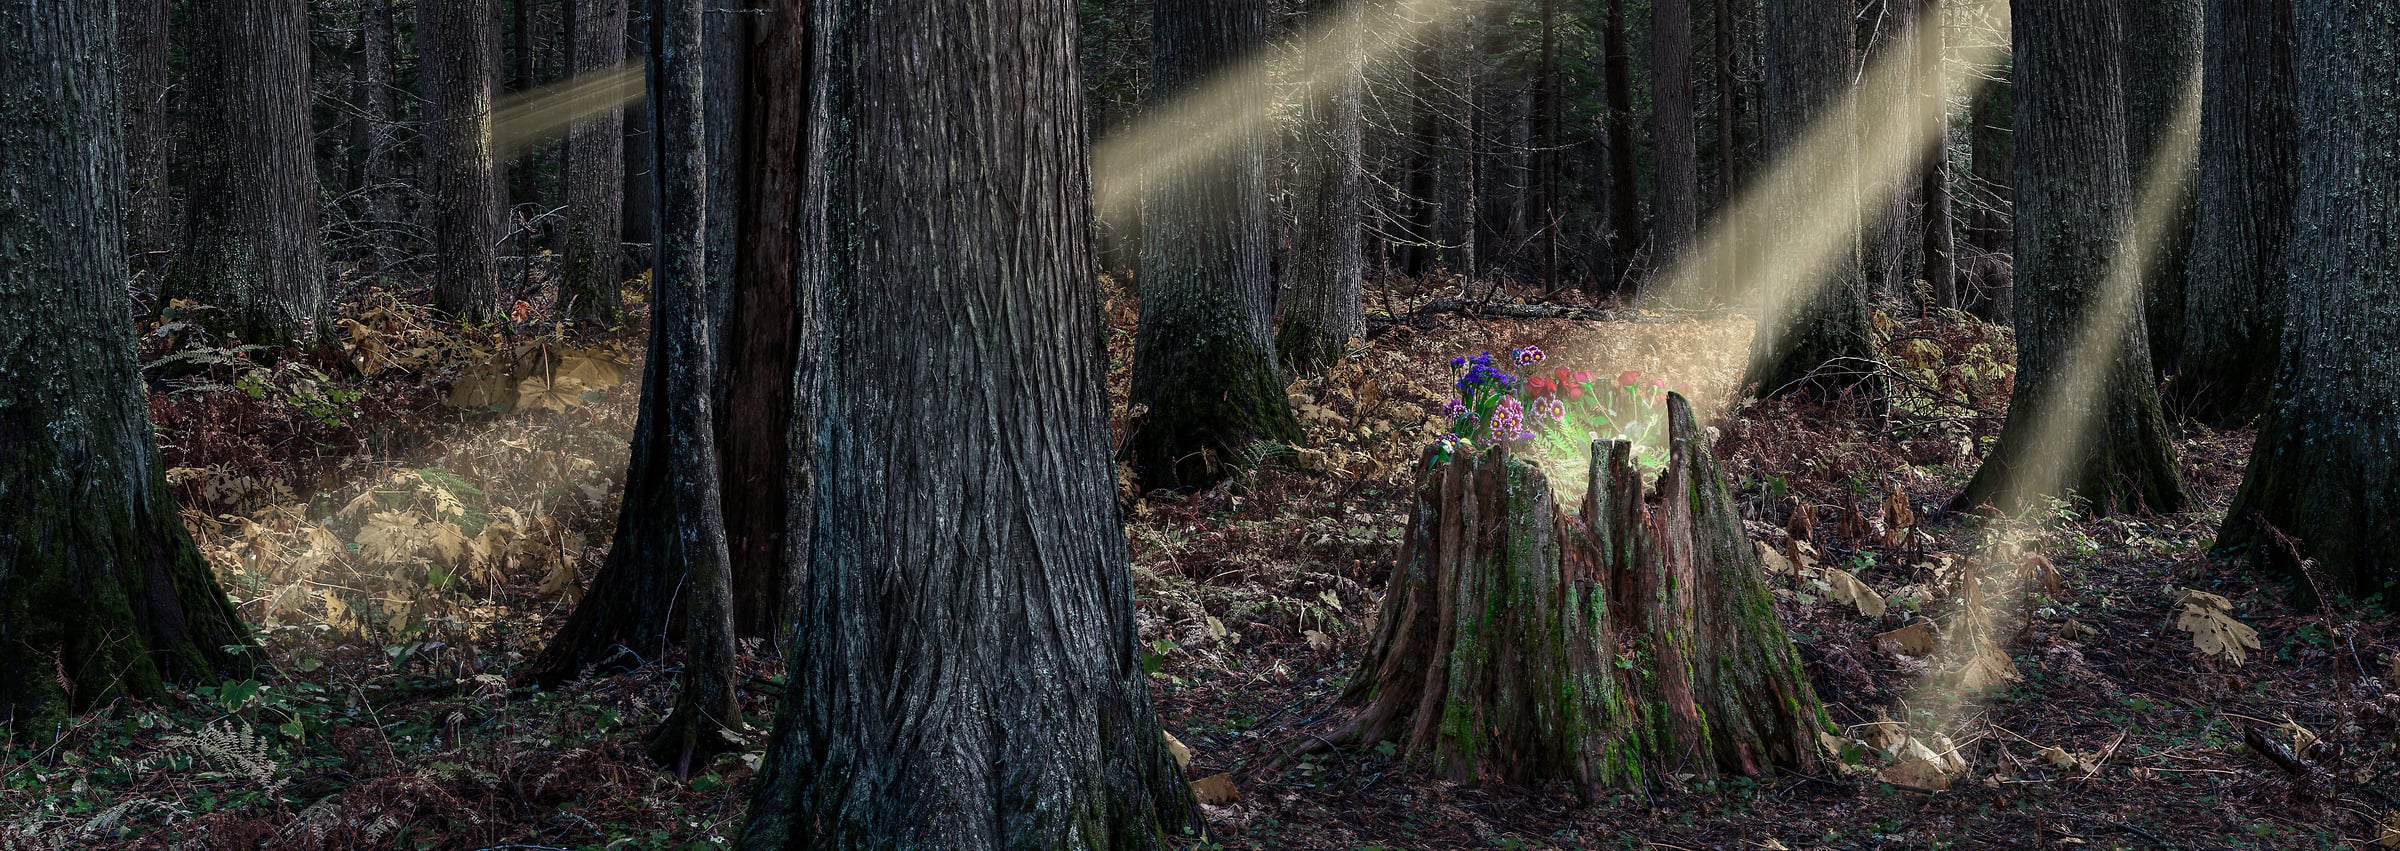 276 megapixels! A very high resolution, large-format VAST photo print of flowers in a stump in a forest with light rays streaming through the trees; nature photograph created by David David in Glacier National Park, Montana.